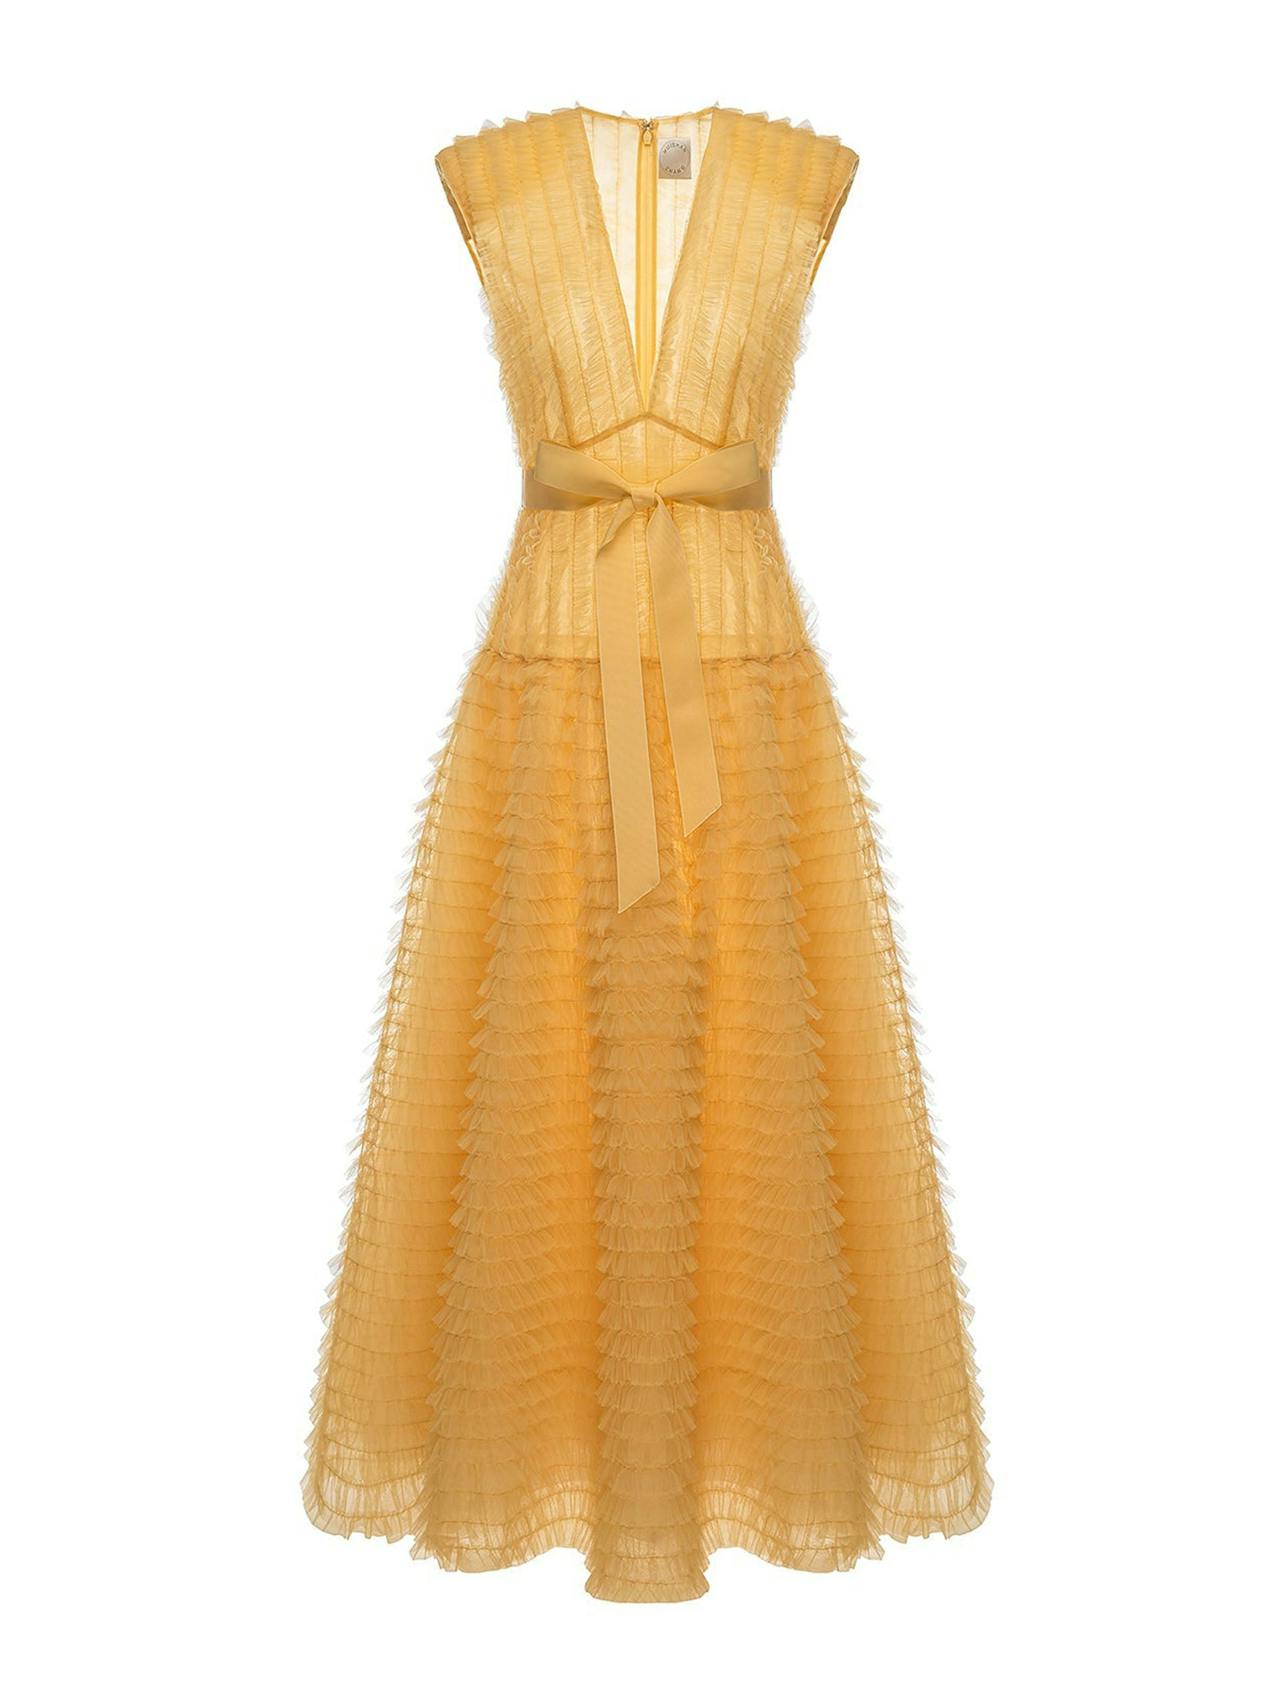 Buttercup embroidered tulle Gertrude dress